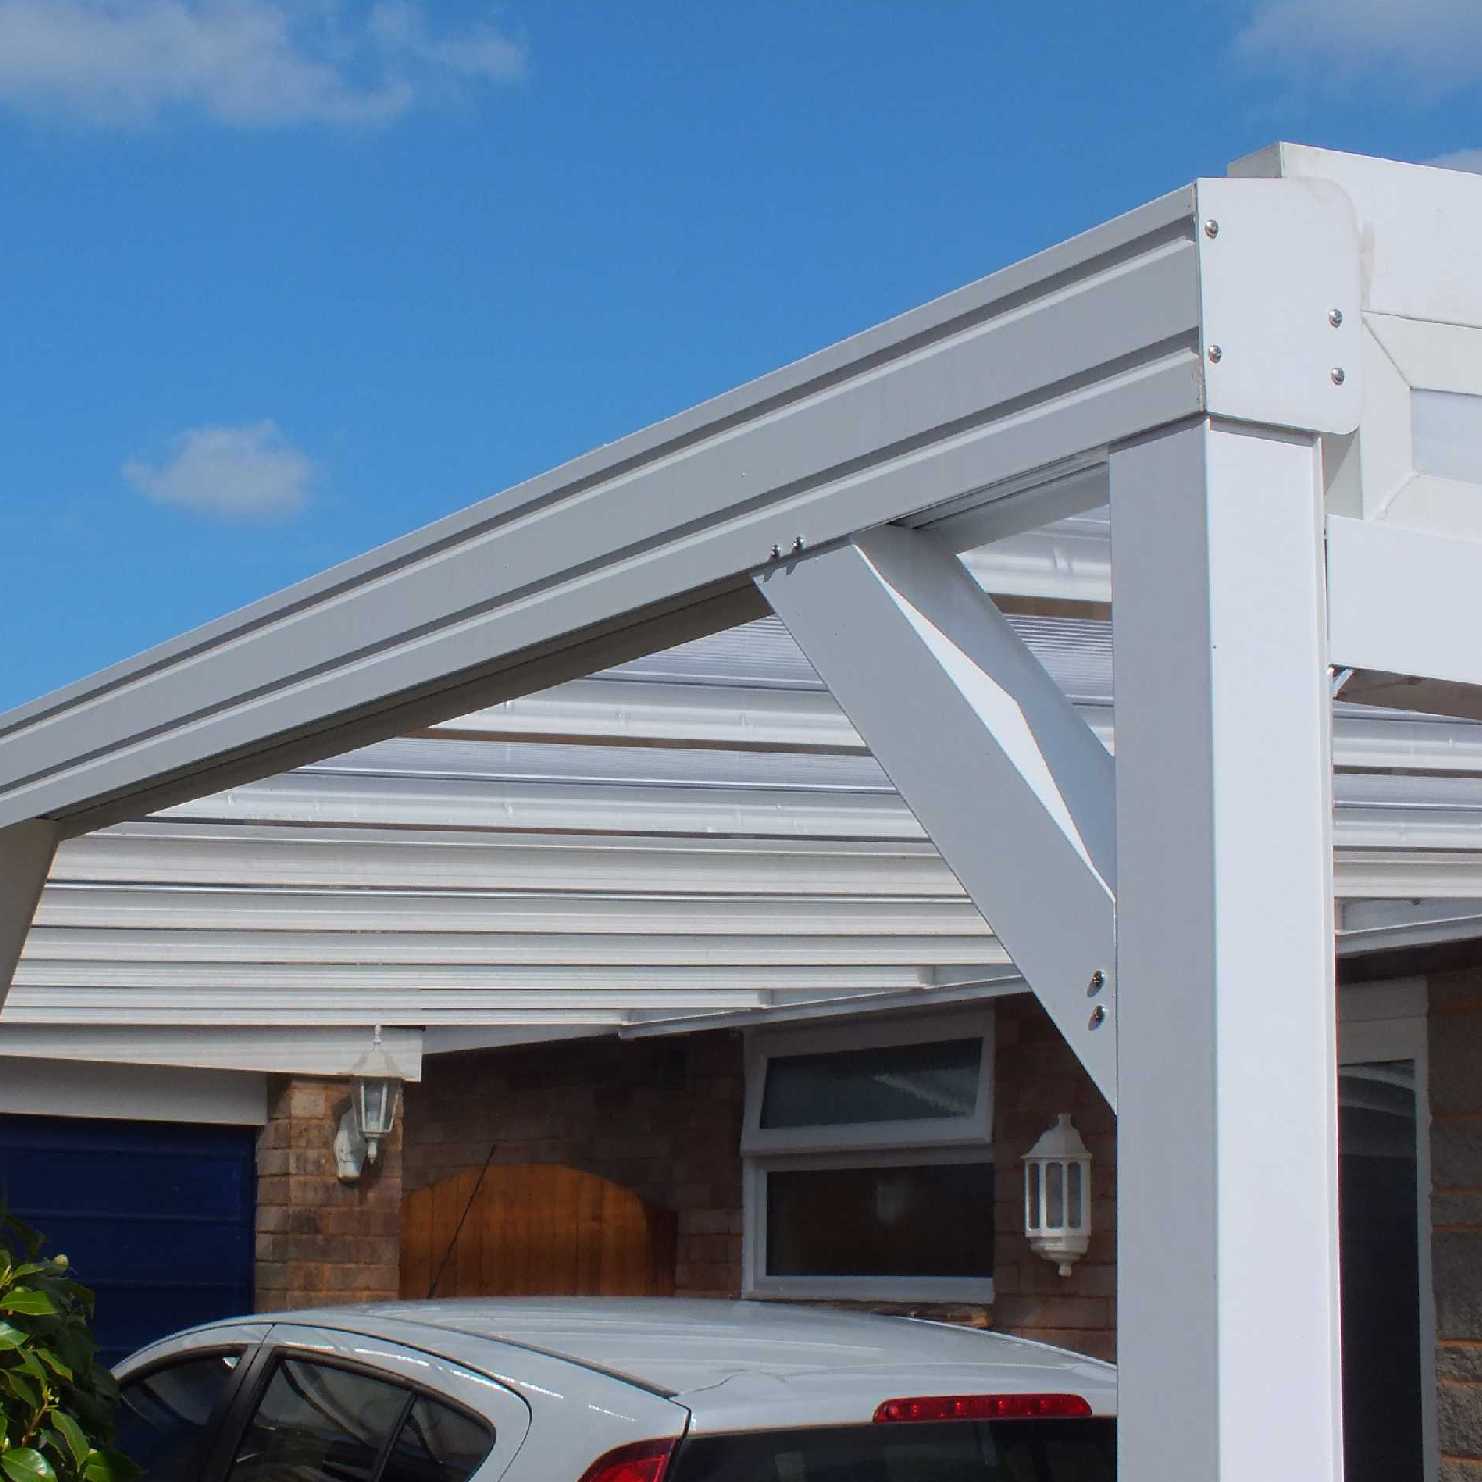 Great deals on Omega Smart Lean-To Canopy, White with 16mm Polycarbonate Glazing - 2.1m (W) x 3.5m (P), (2) Supporting Posts